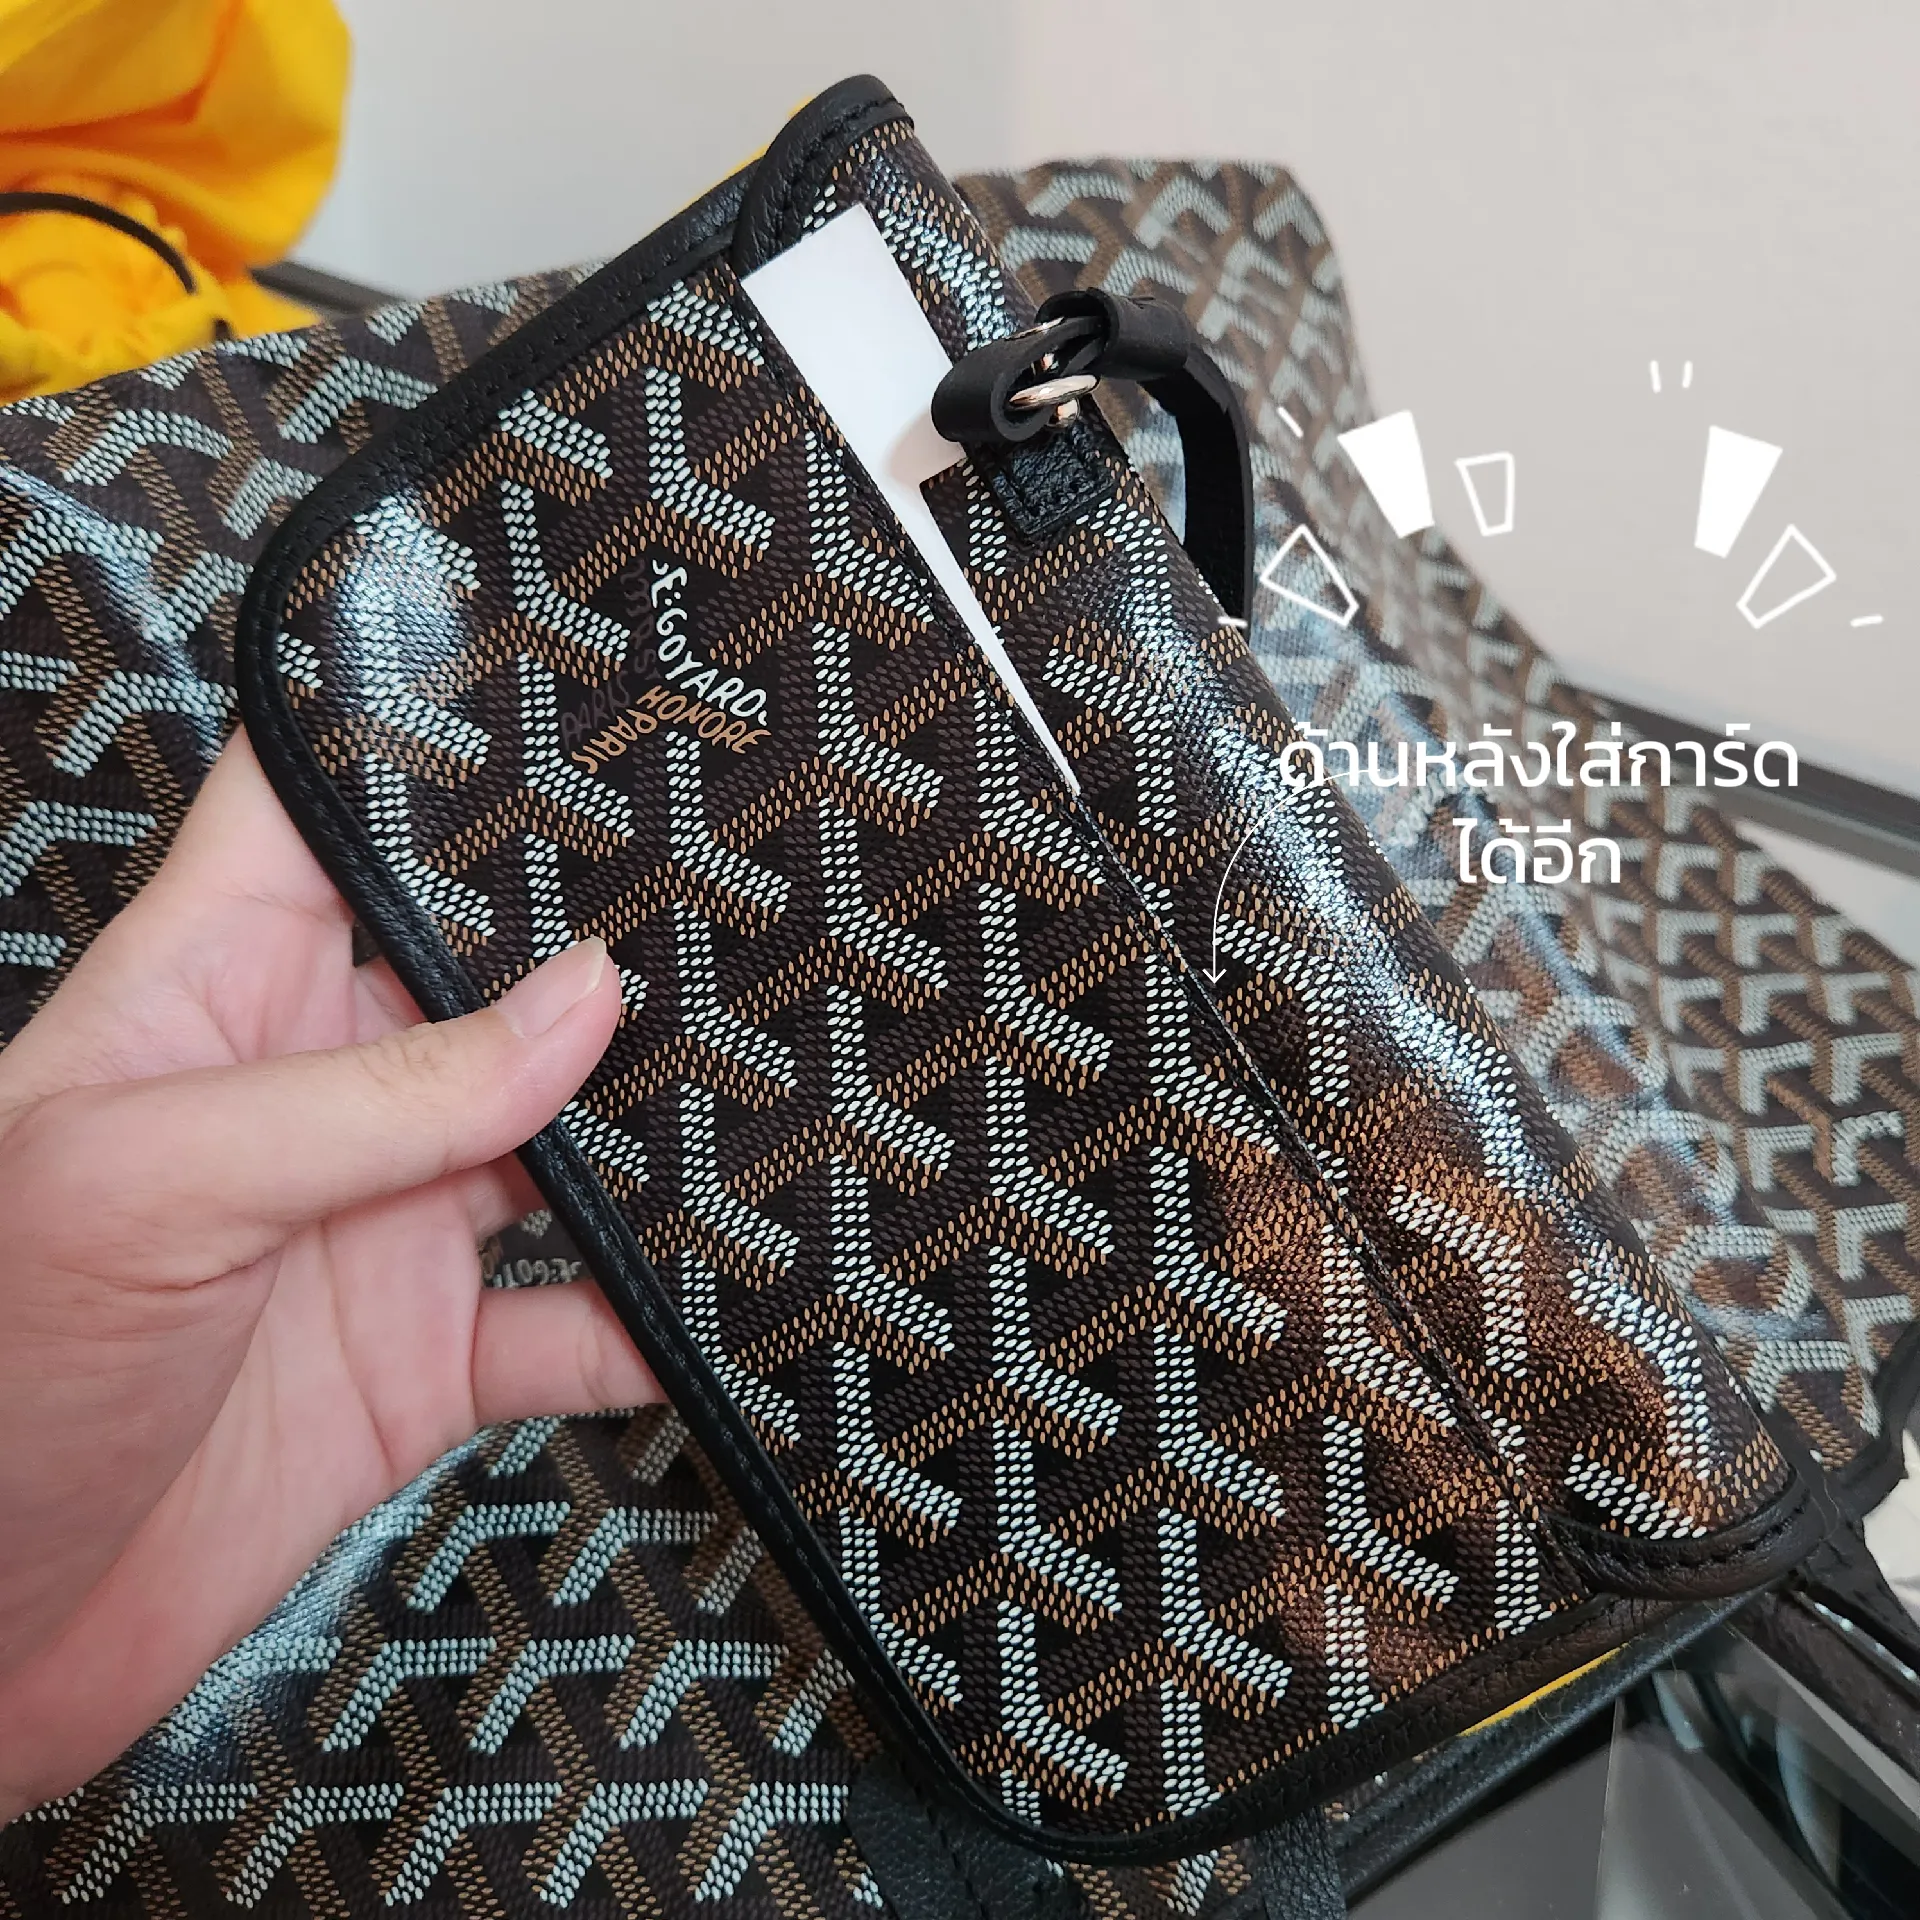 Bag Review: The KATE SPADE LINK TOTE - the Large One! A Great Goyard or  Neverfull Alternative 